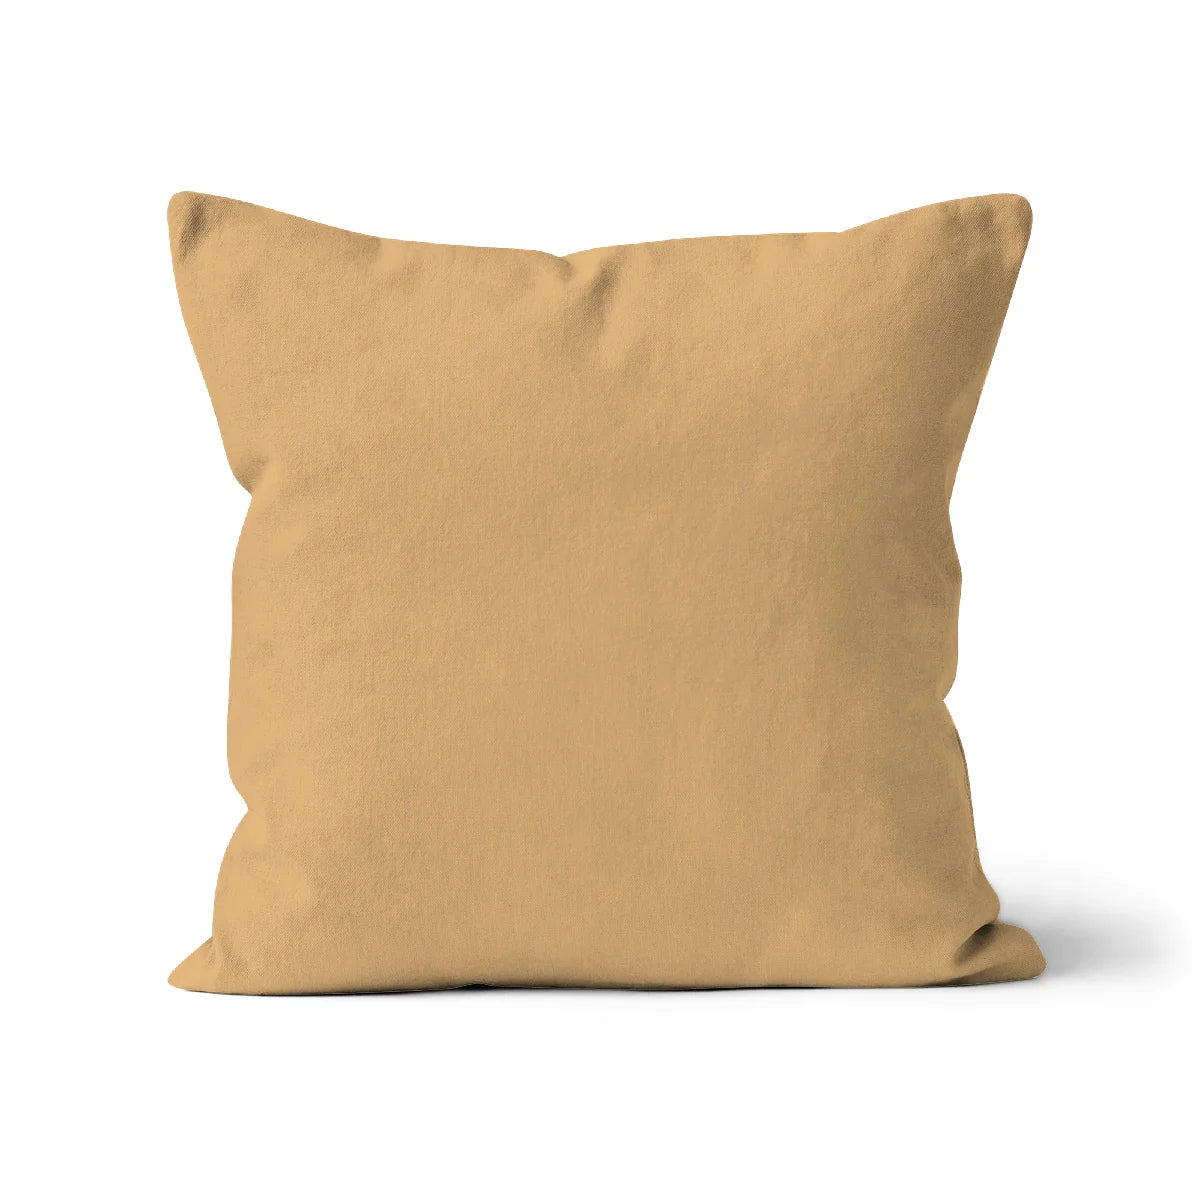 Luxurious Decorative Pillowcase, Affordable Organic Cotton Caramel Cream Pillow Cover, Buy 100% Organic Cotton Caramel Cream Cushion Cover Online, Designer Cushion Cover with Natural Patterns, Caramel Cream Velvet Pillowcase in Organic Cotton, Organic Cotton Caramel Cream Cushion Cover for Sale, Eco-Friendly Soft Furnishings,